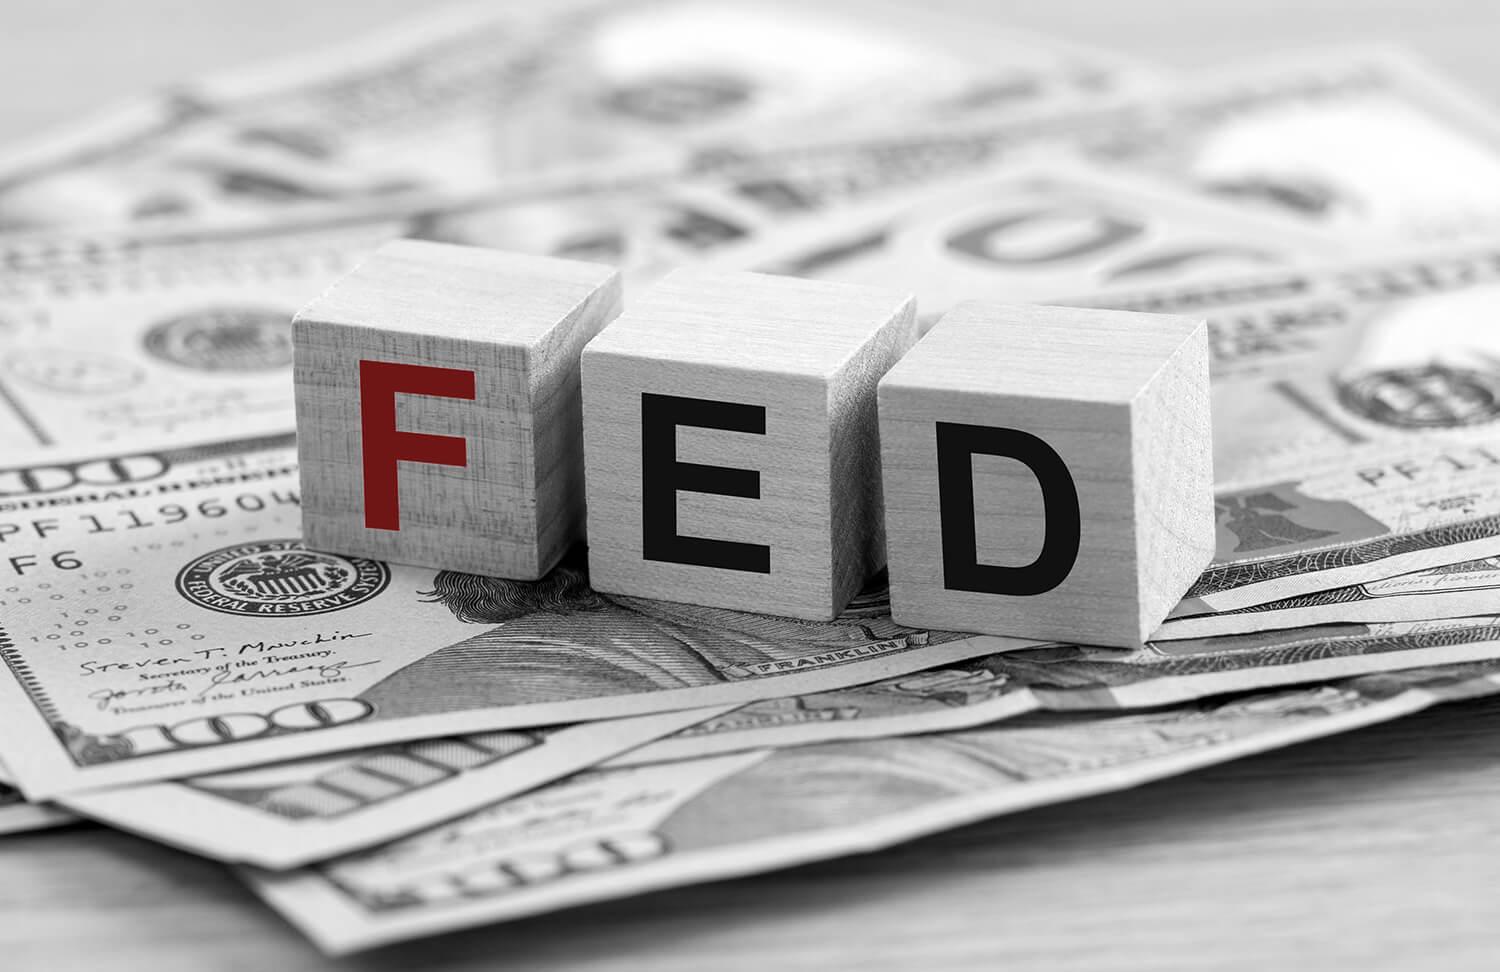 Federal Reserve is destabilizing global financial markets and harming other economies